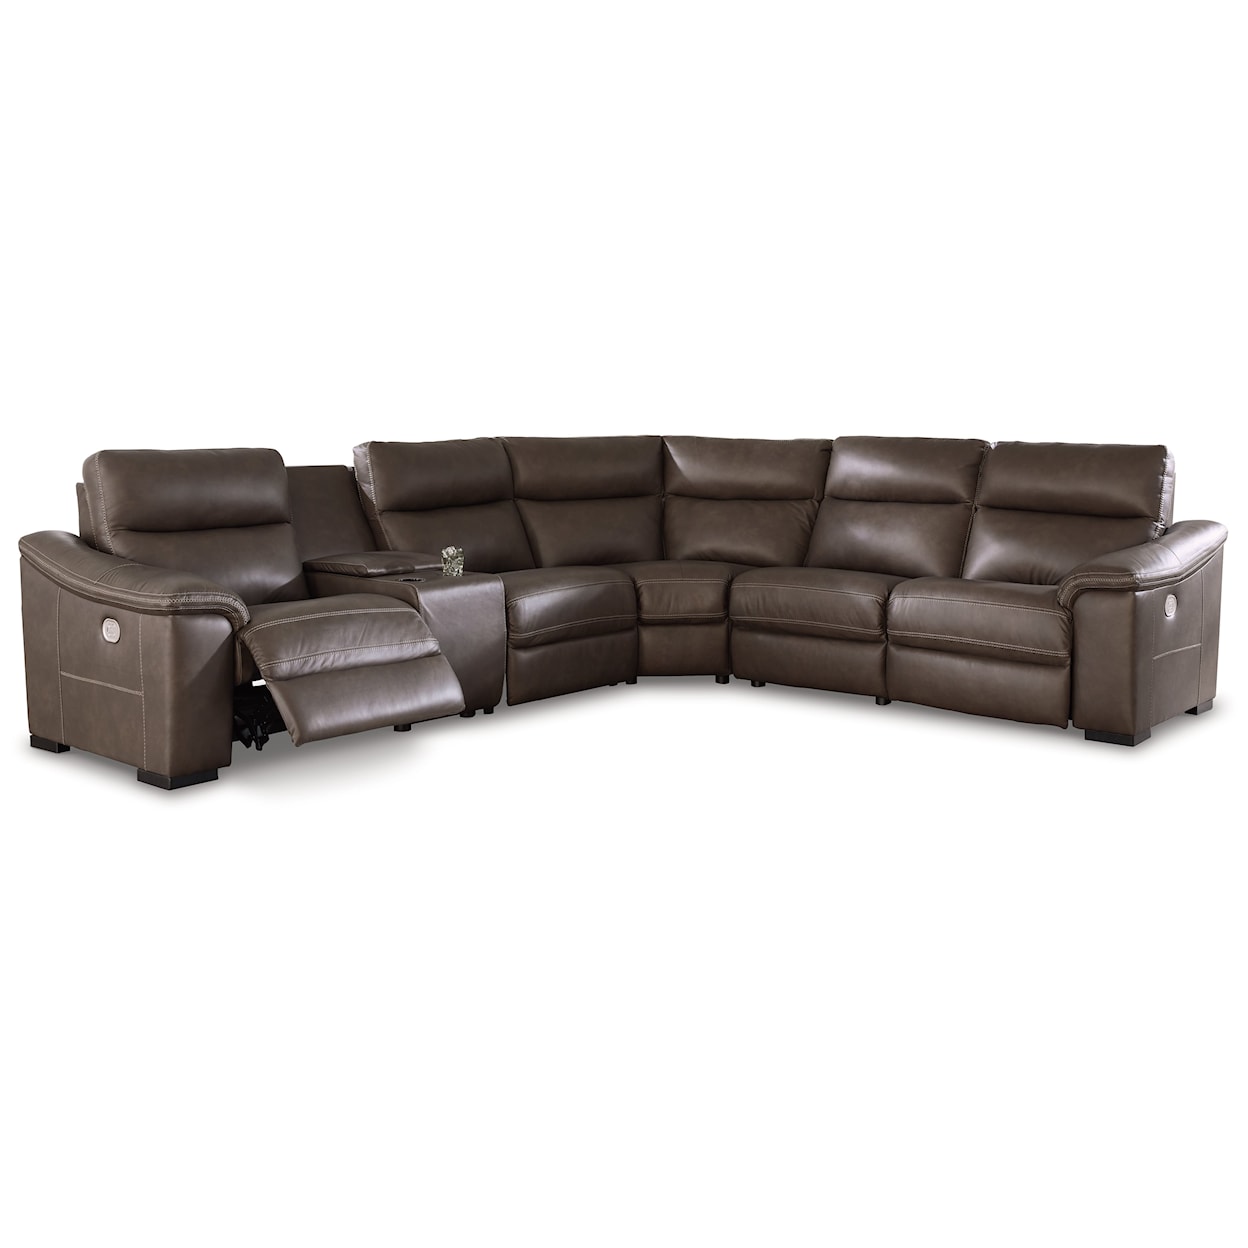 Signature Design by Ashley Salvatore Power Reclining Sectional Sofa